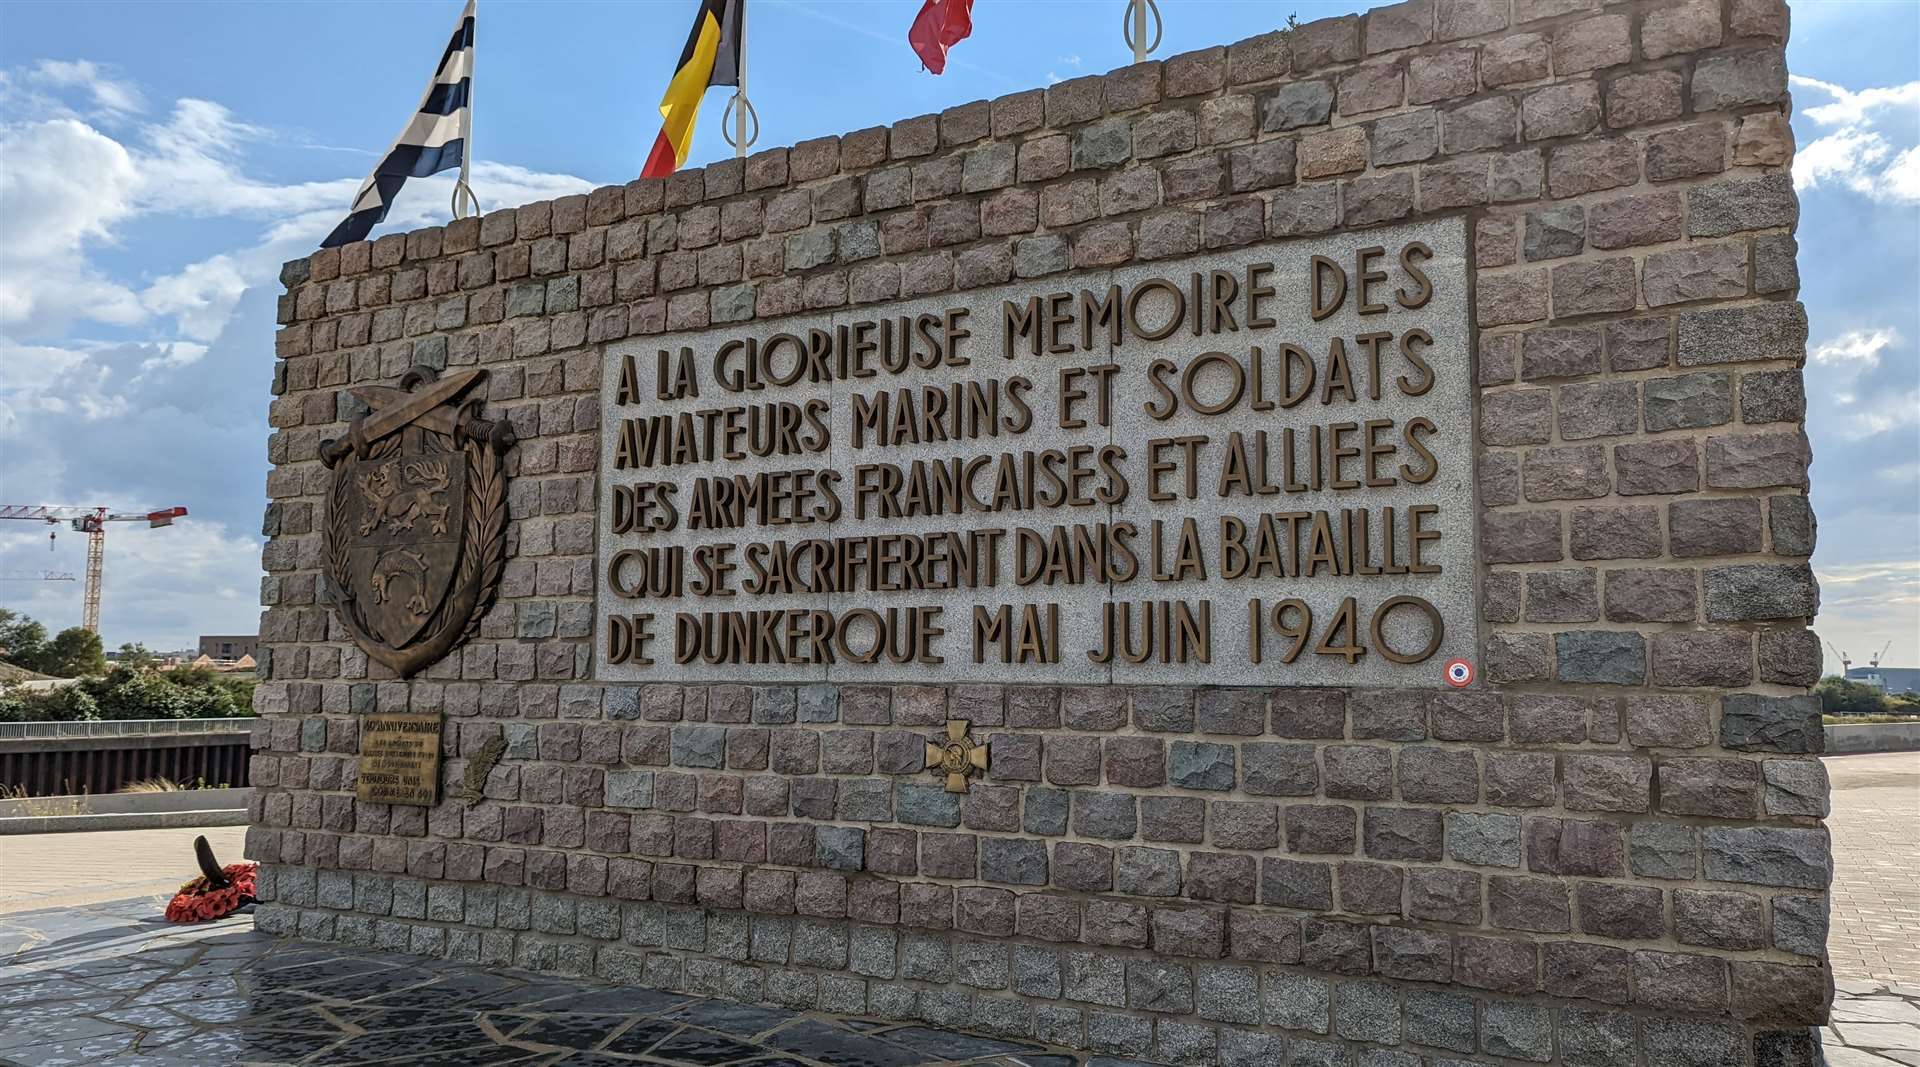 The seafront memorial to the dead of the Battle of Dunkirk in 1940